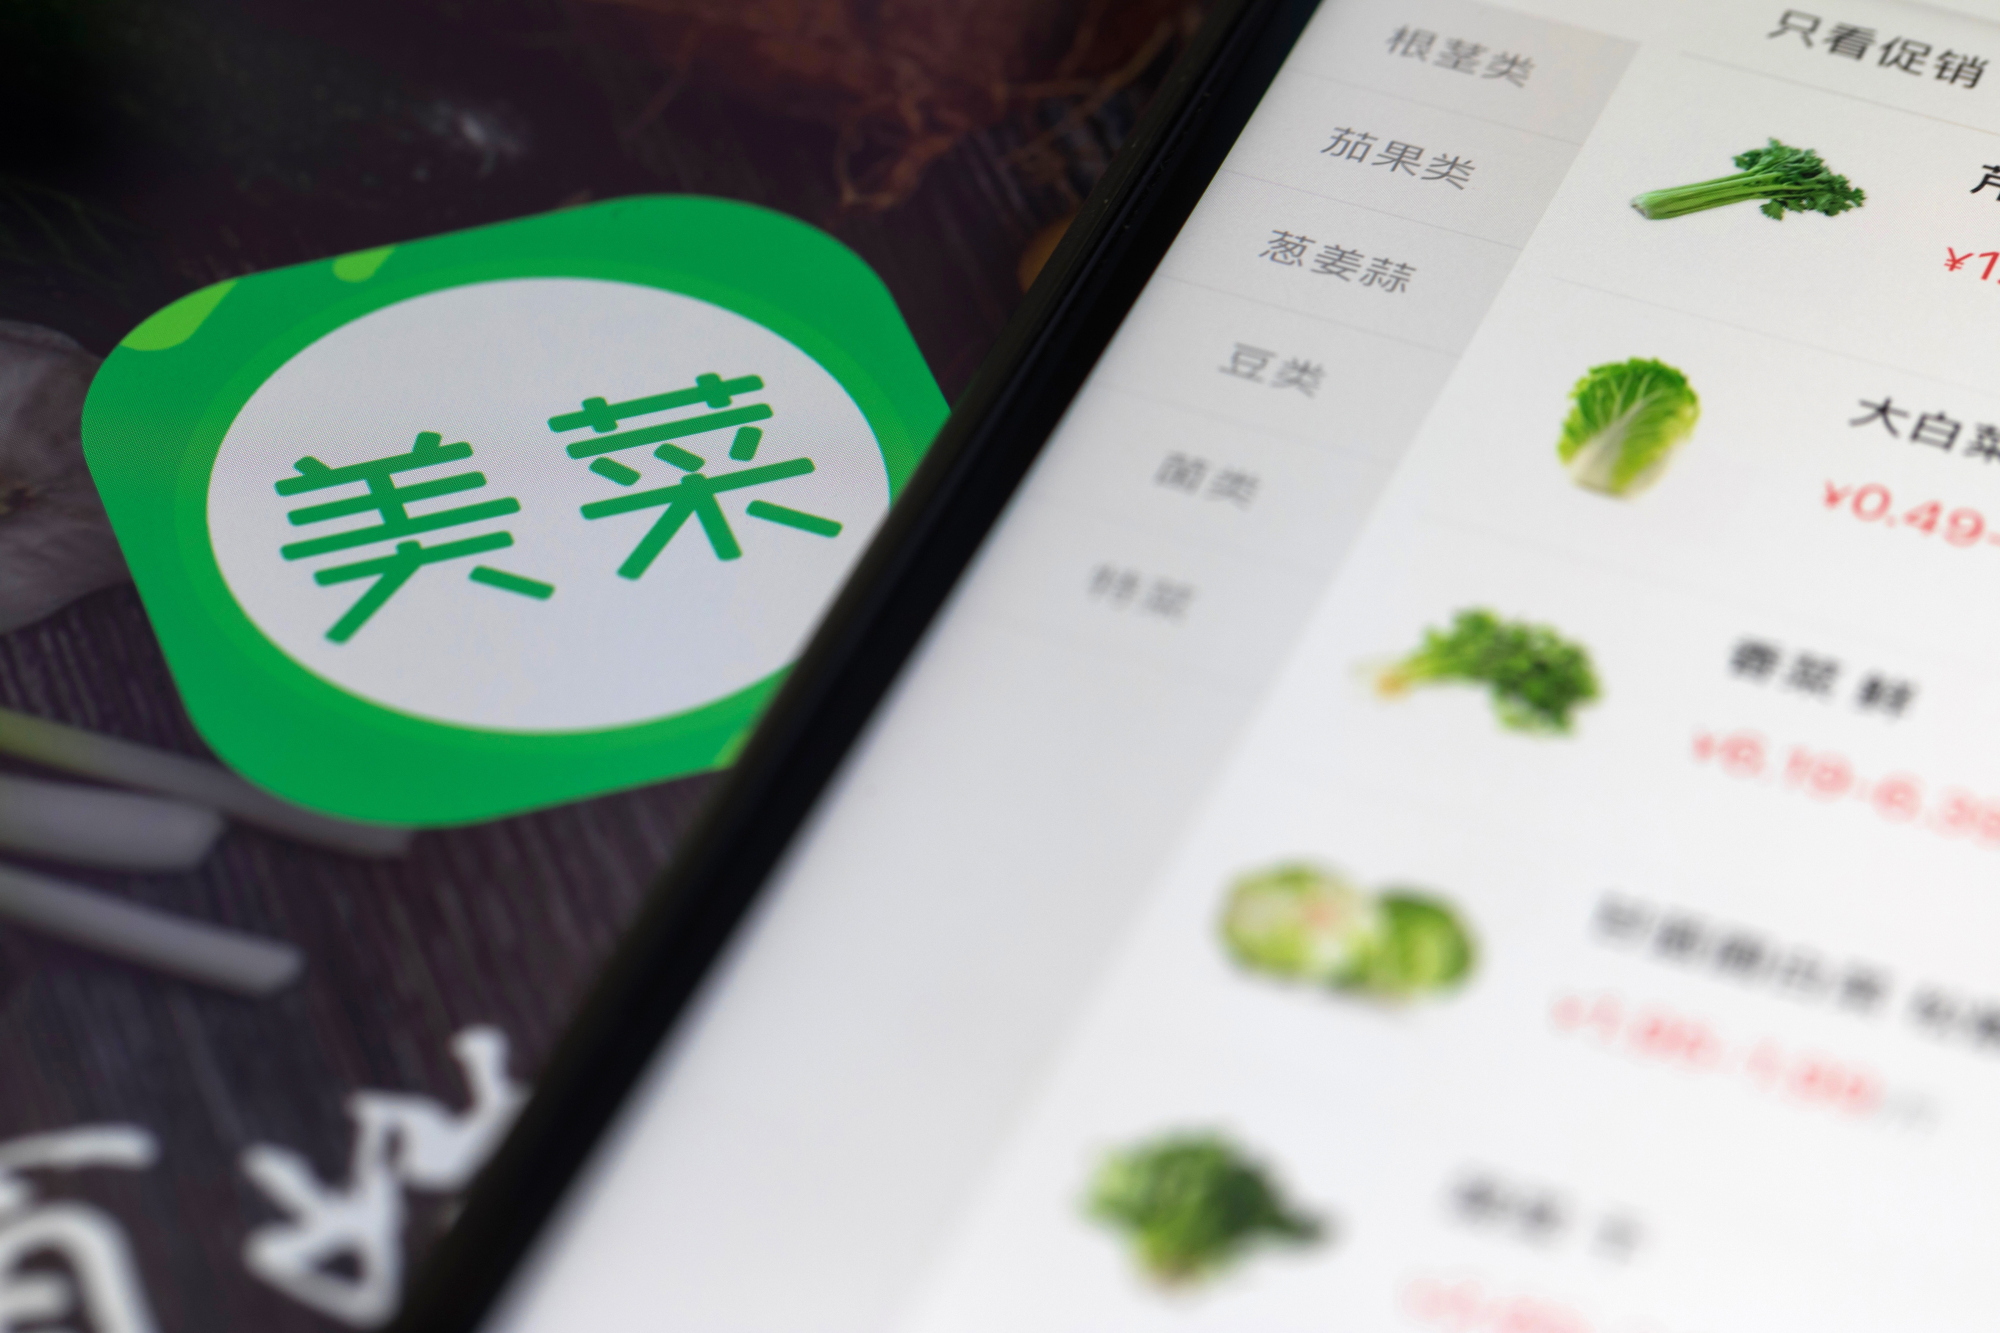 Illustrations of Meicai Application As Vegetable-Selling Startup Valued at $2.8 Billion